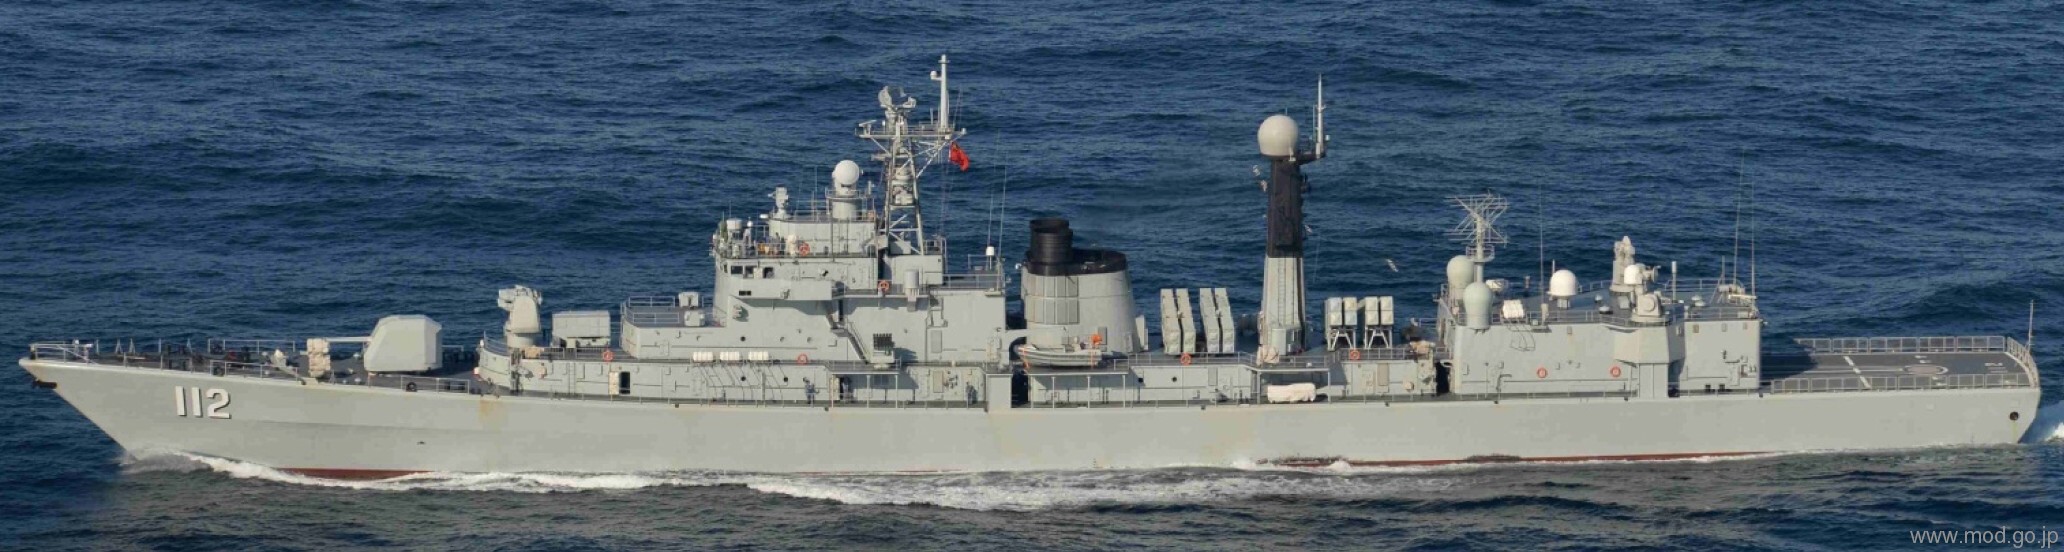 ddg-112 plans harbin type 052 luhu class guided missile destroyer china peoples liberation army navy plan 05